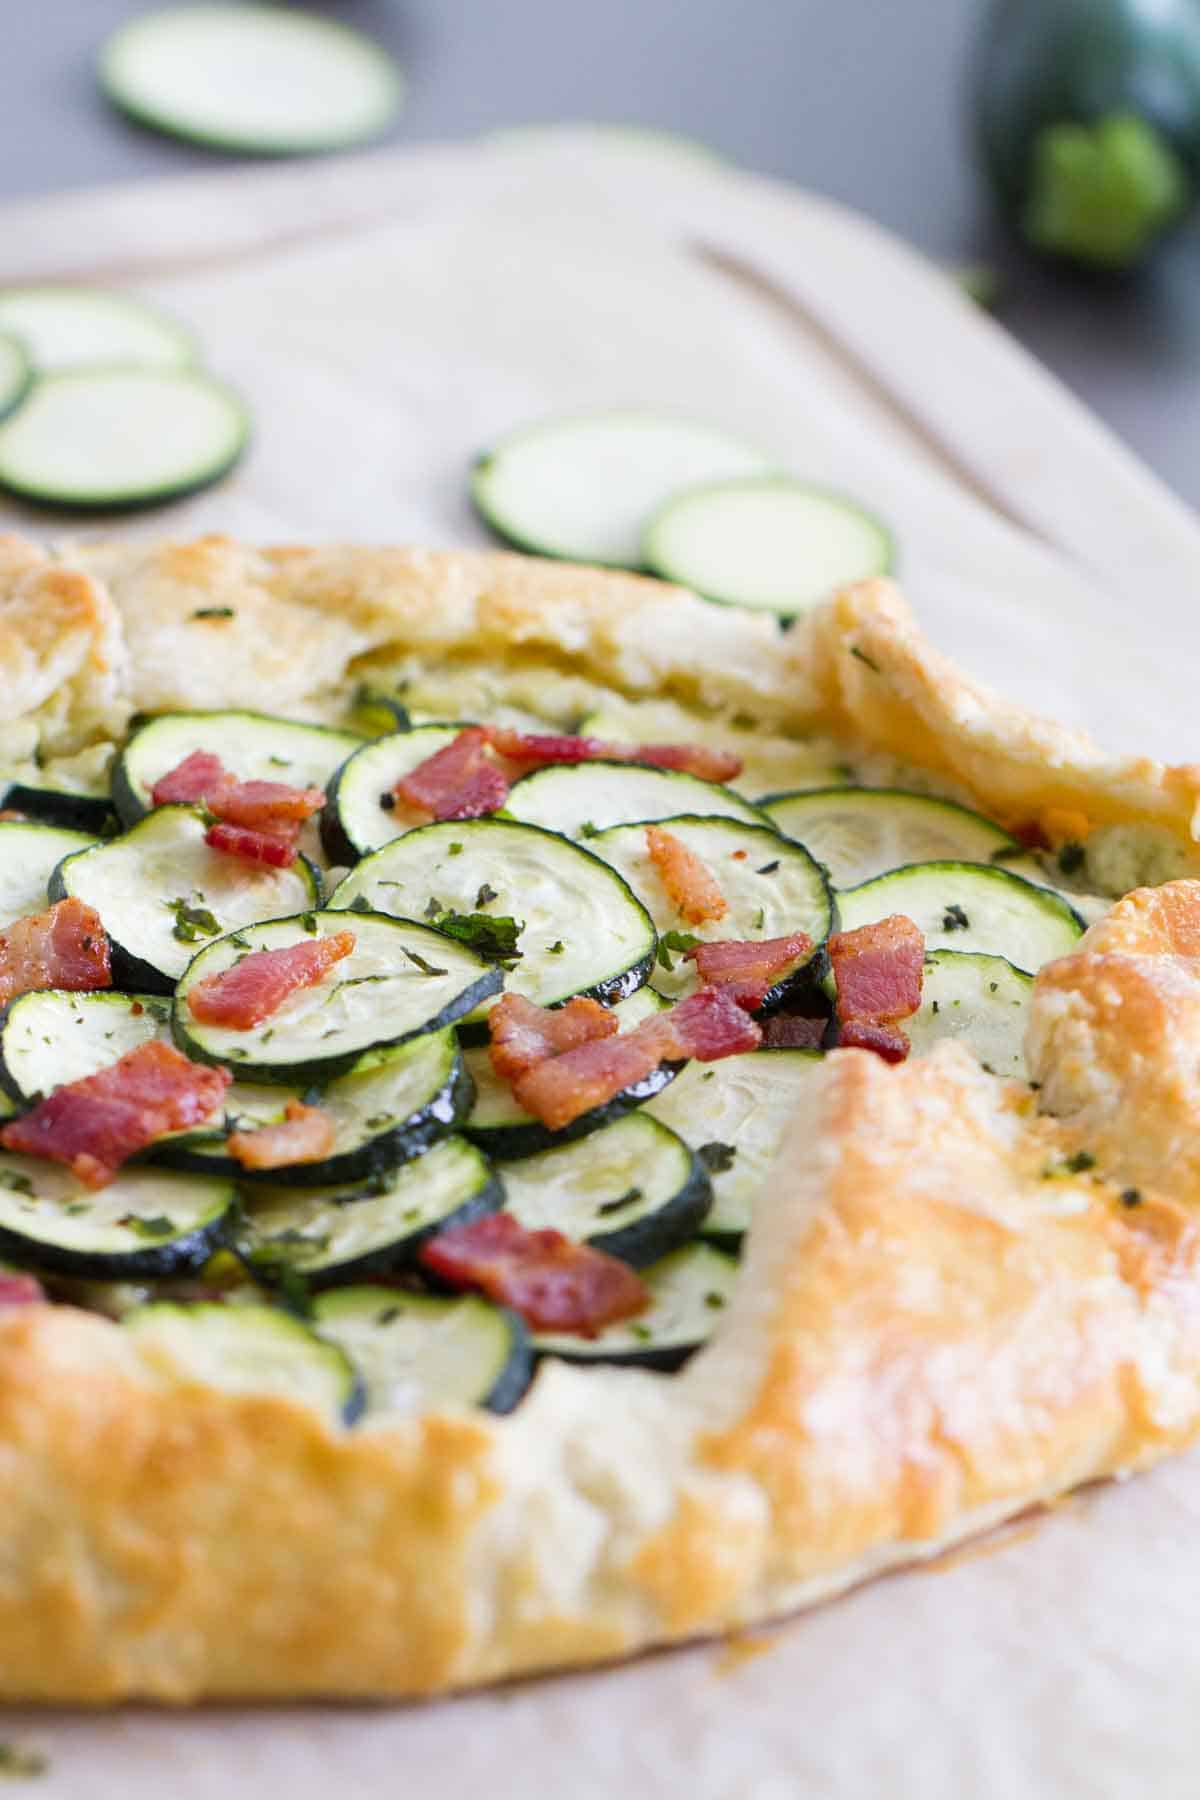 Full zucchini tart with ricotta and bacon on a cutting board